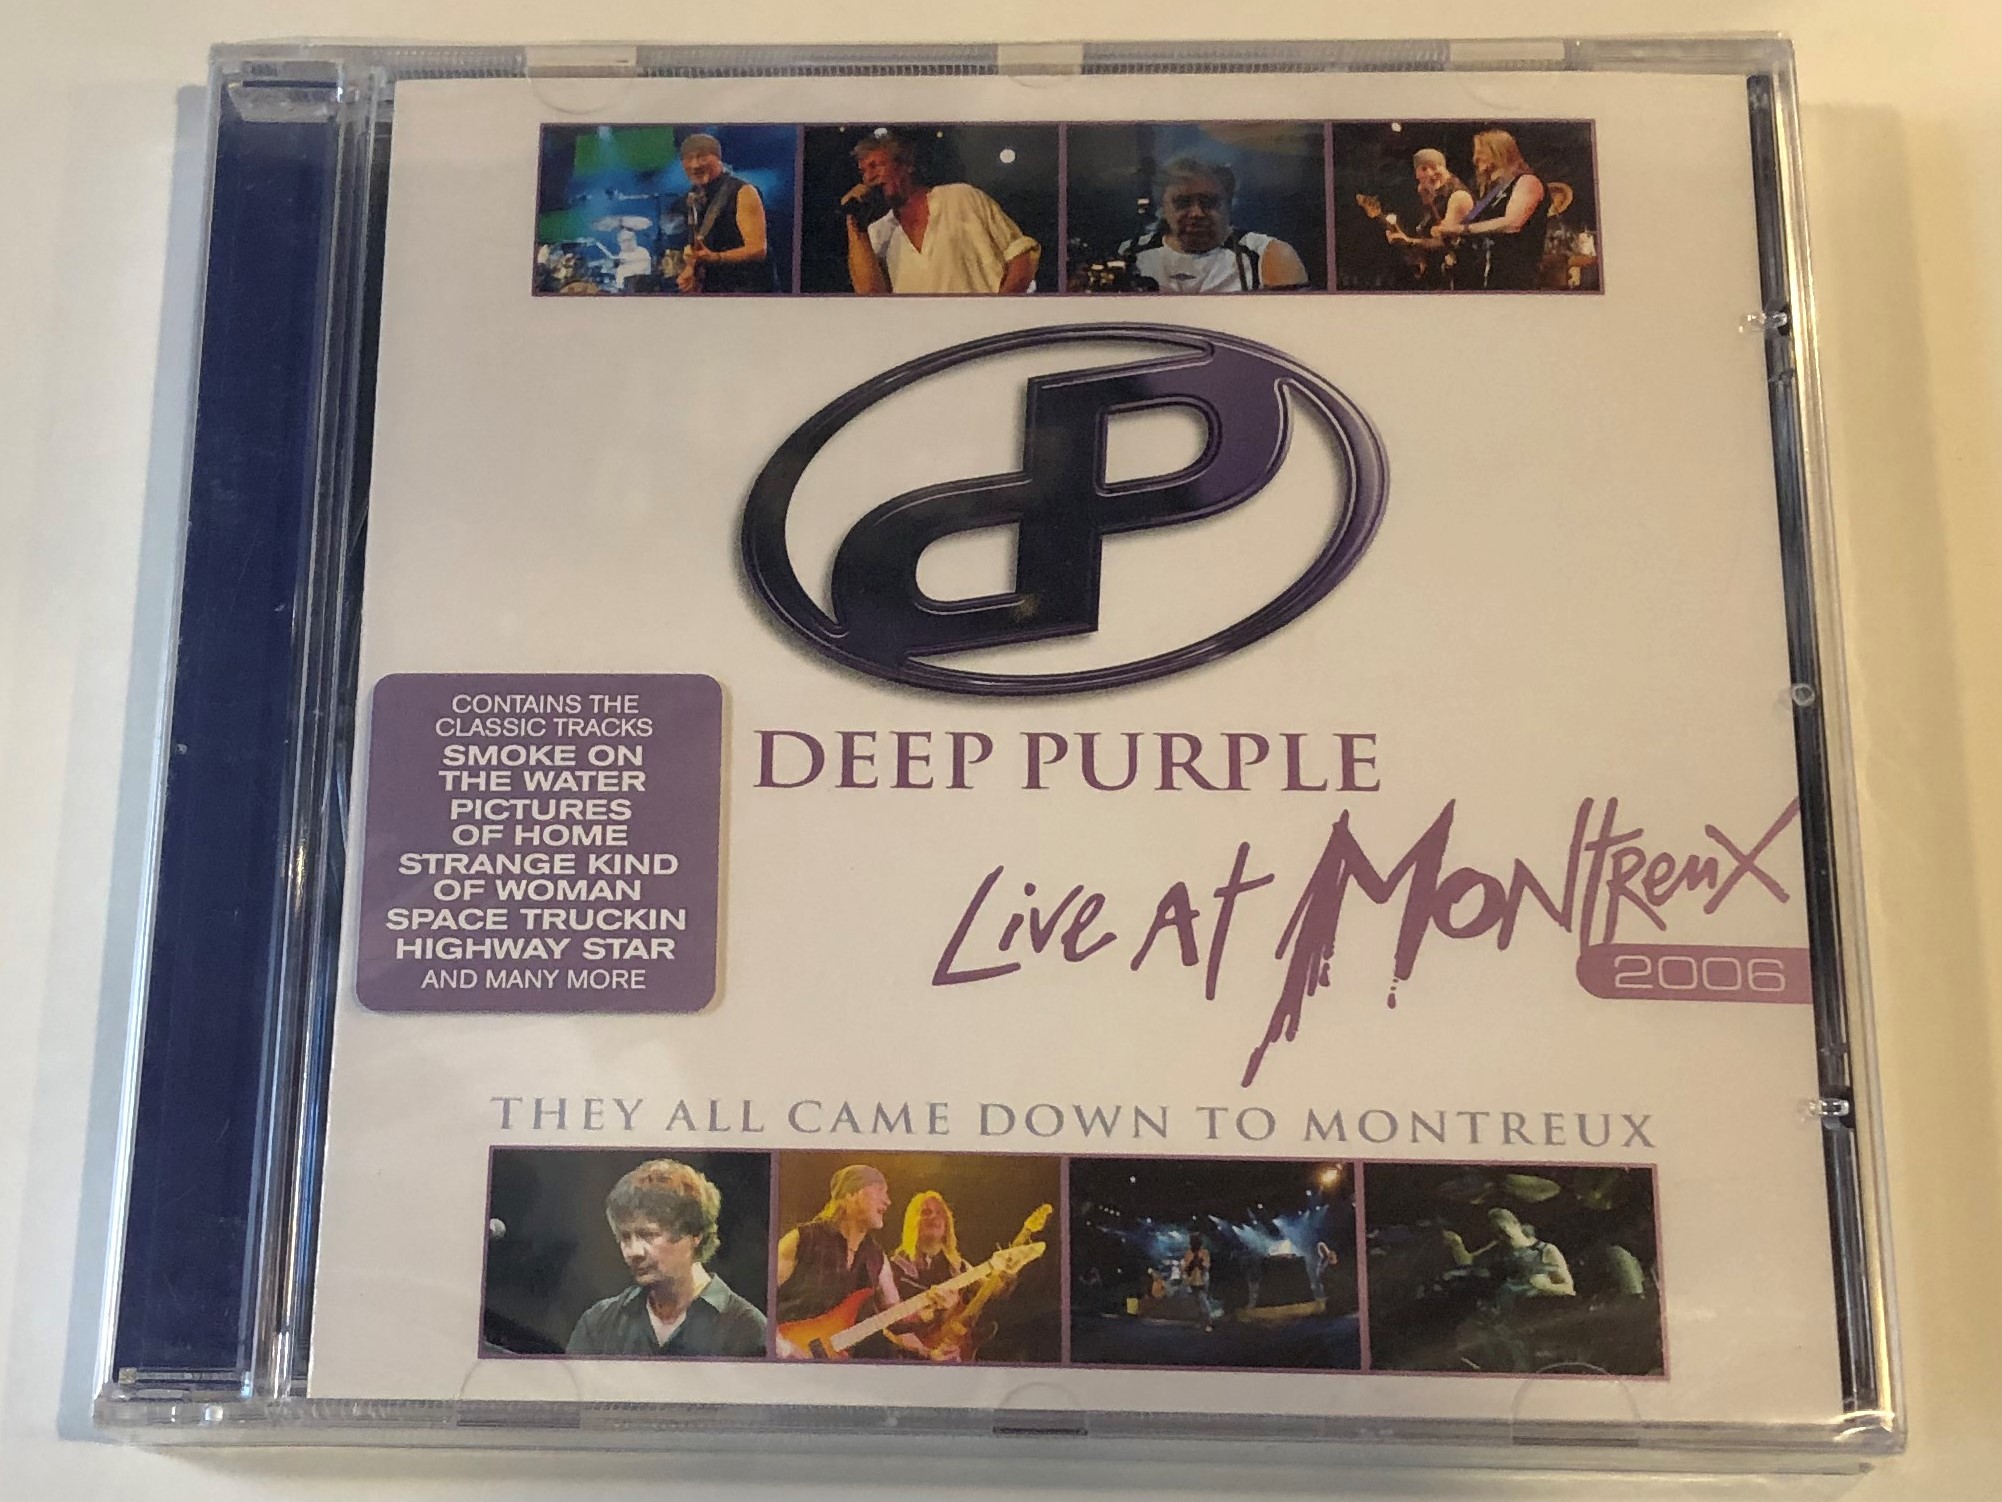 deep-purple-live-at-montreux-2006-they-all-came-down-to-montreux-eagle-records-audio-cd-2007-eagcd356-1-.jpg